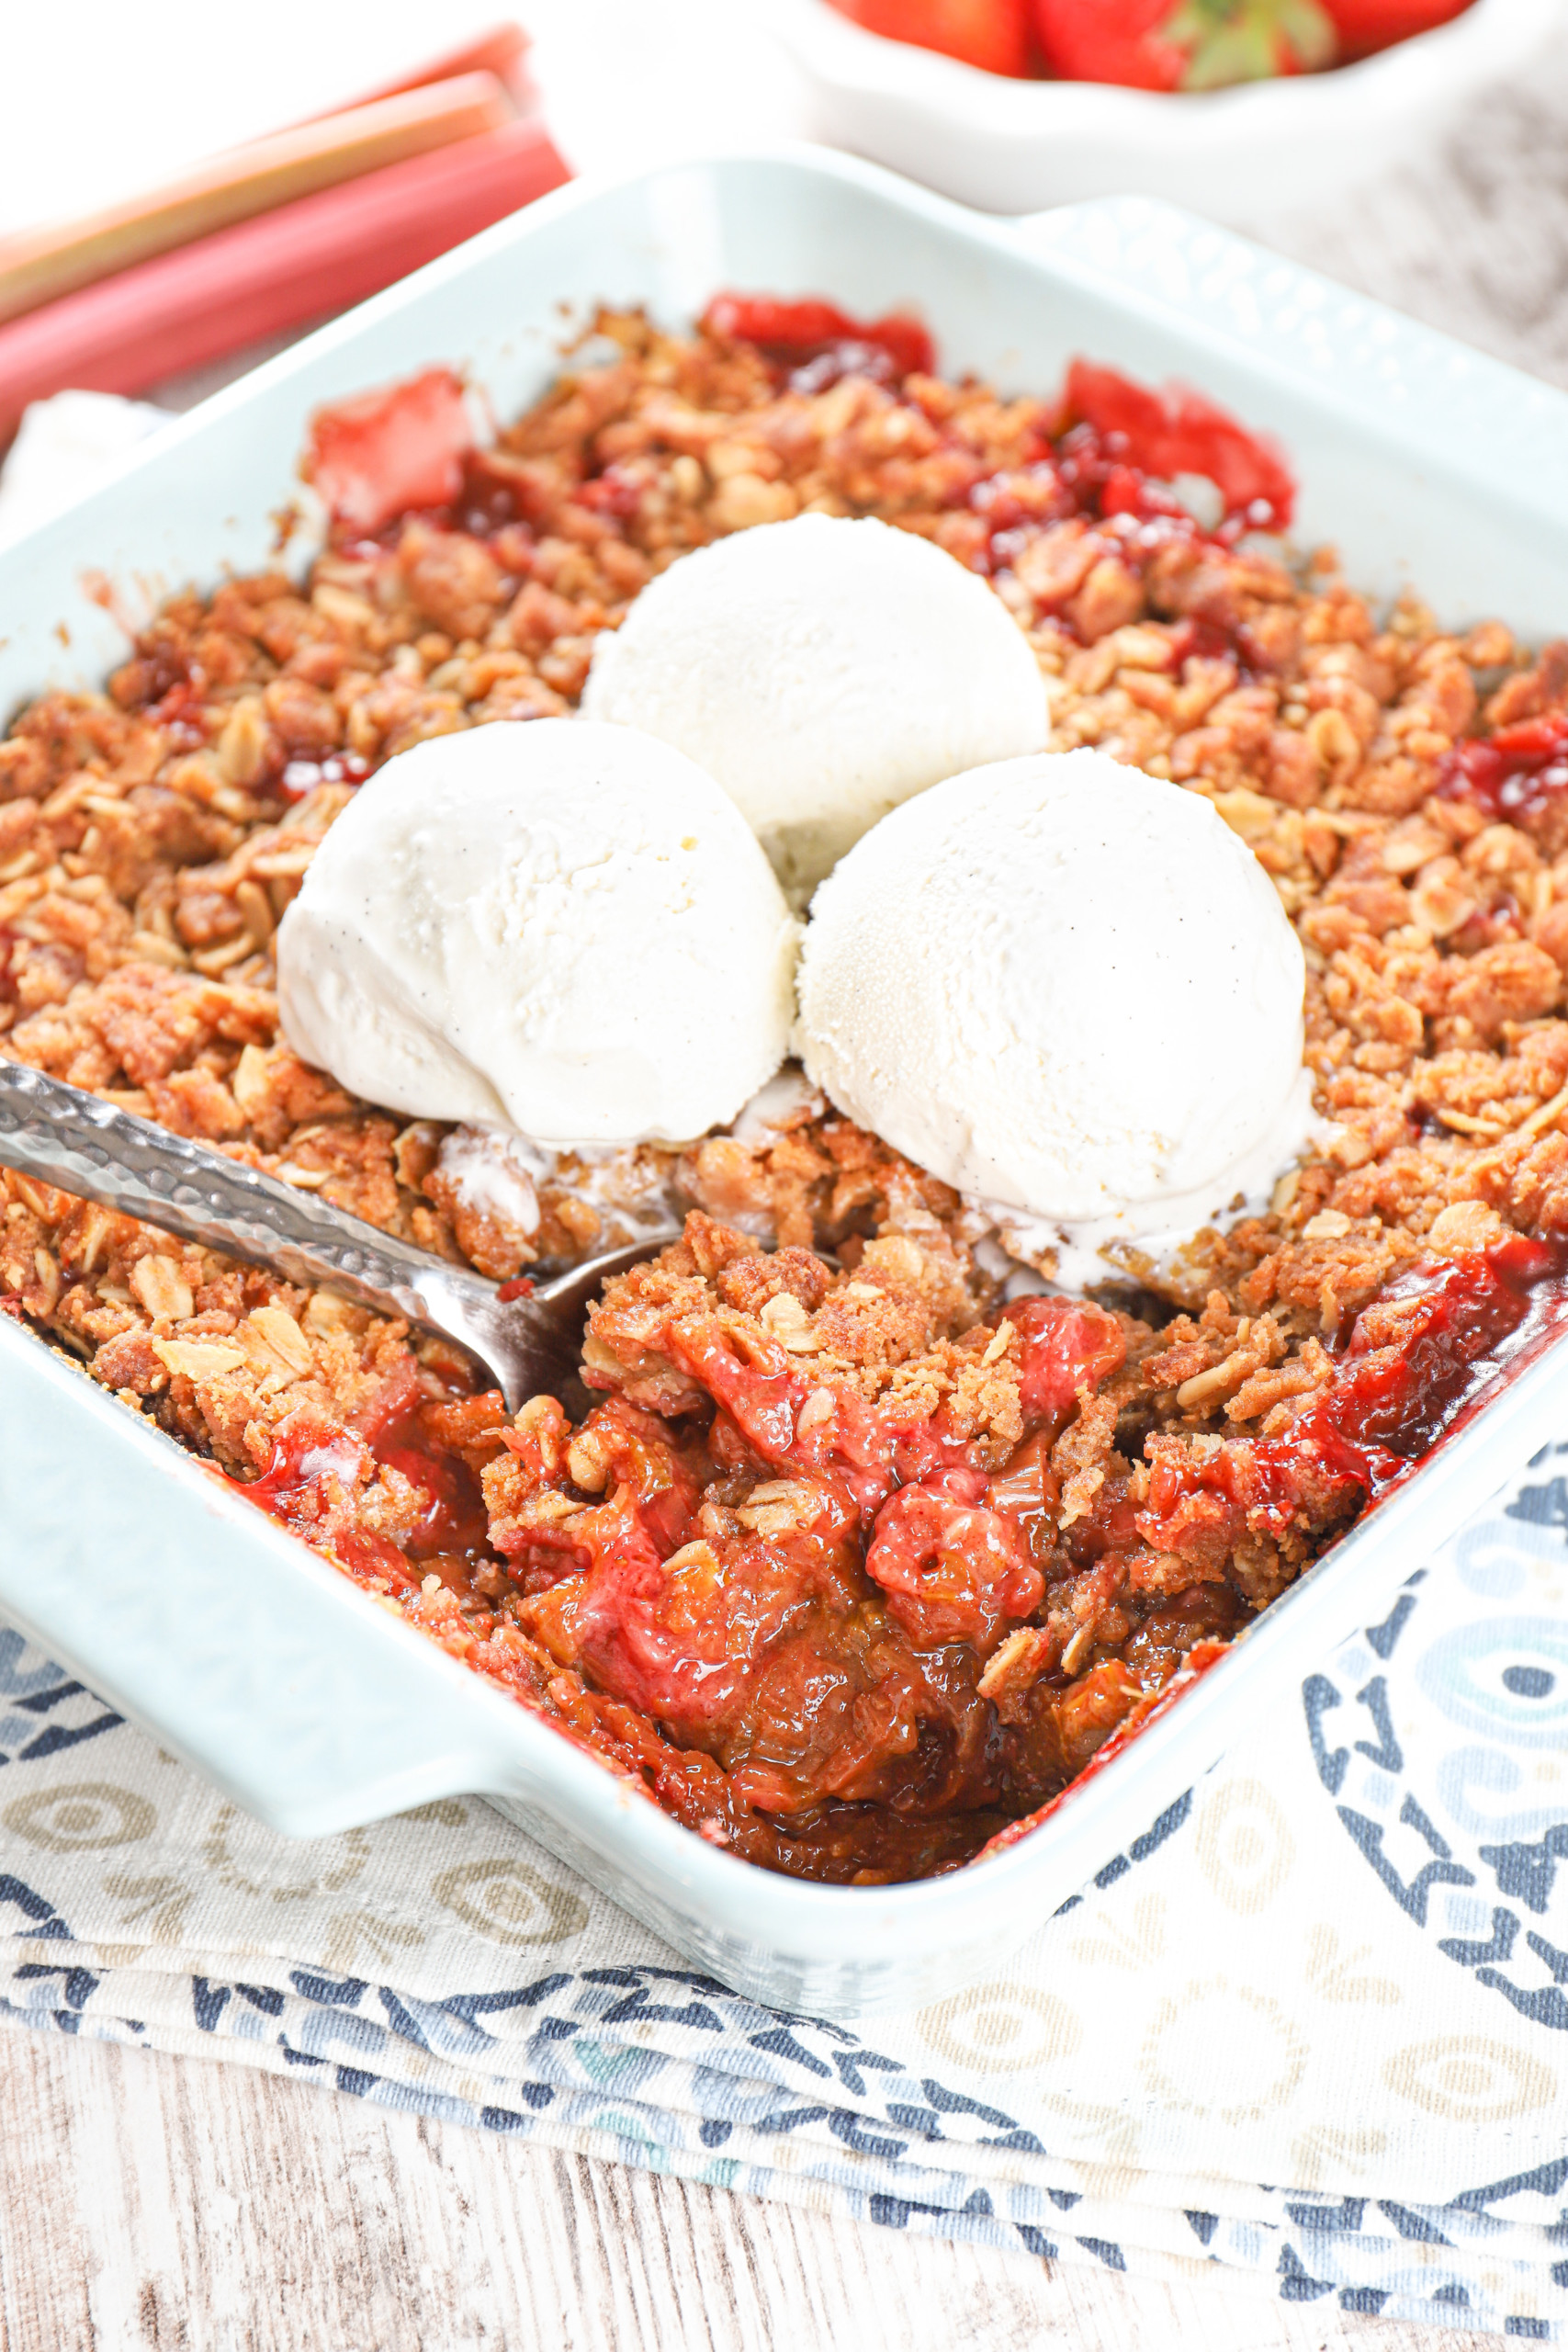 Overhead view of a scoop of strawberry rhubarb crisp in a light blue baking dish.